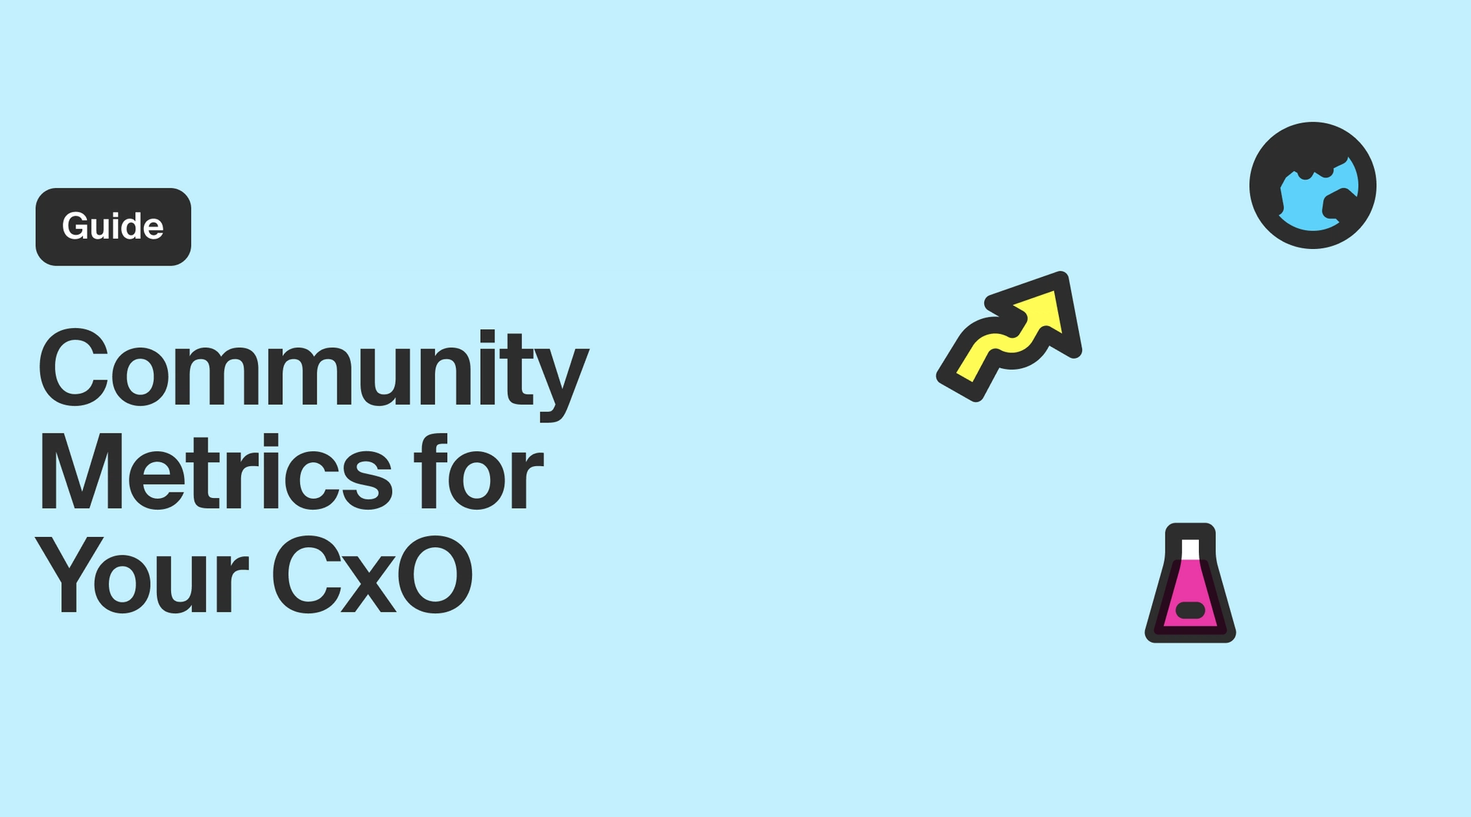 Talking about community metrics with your CxO